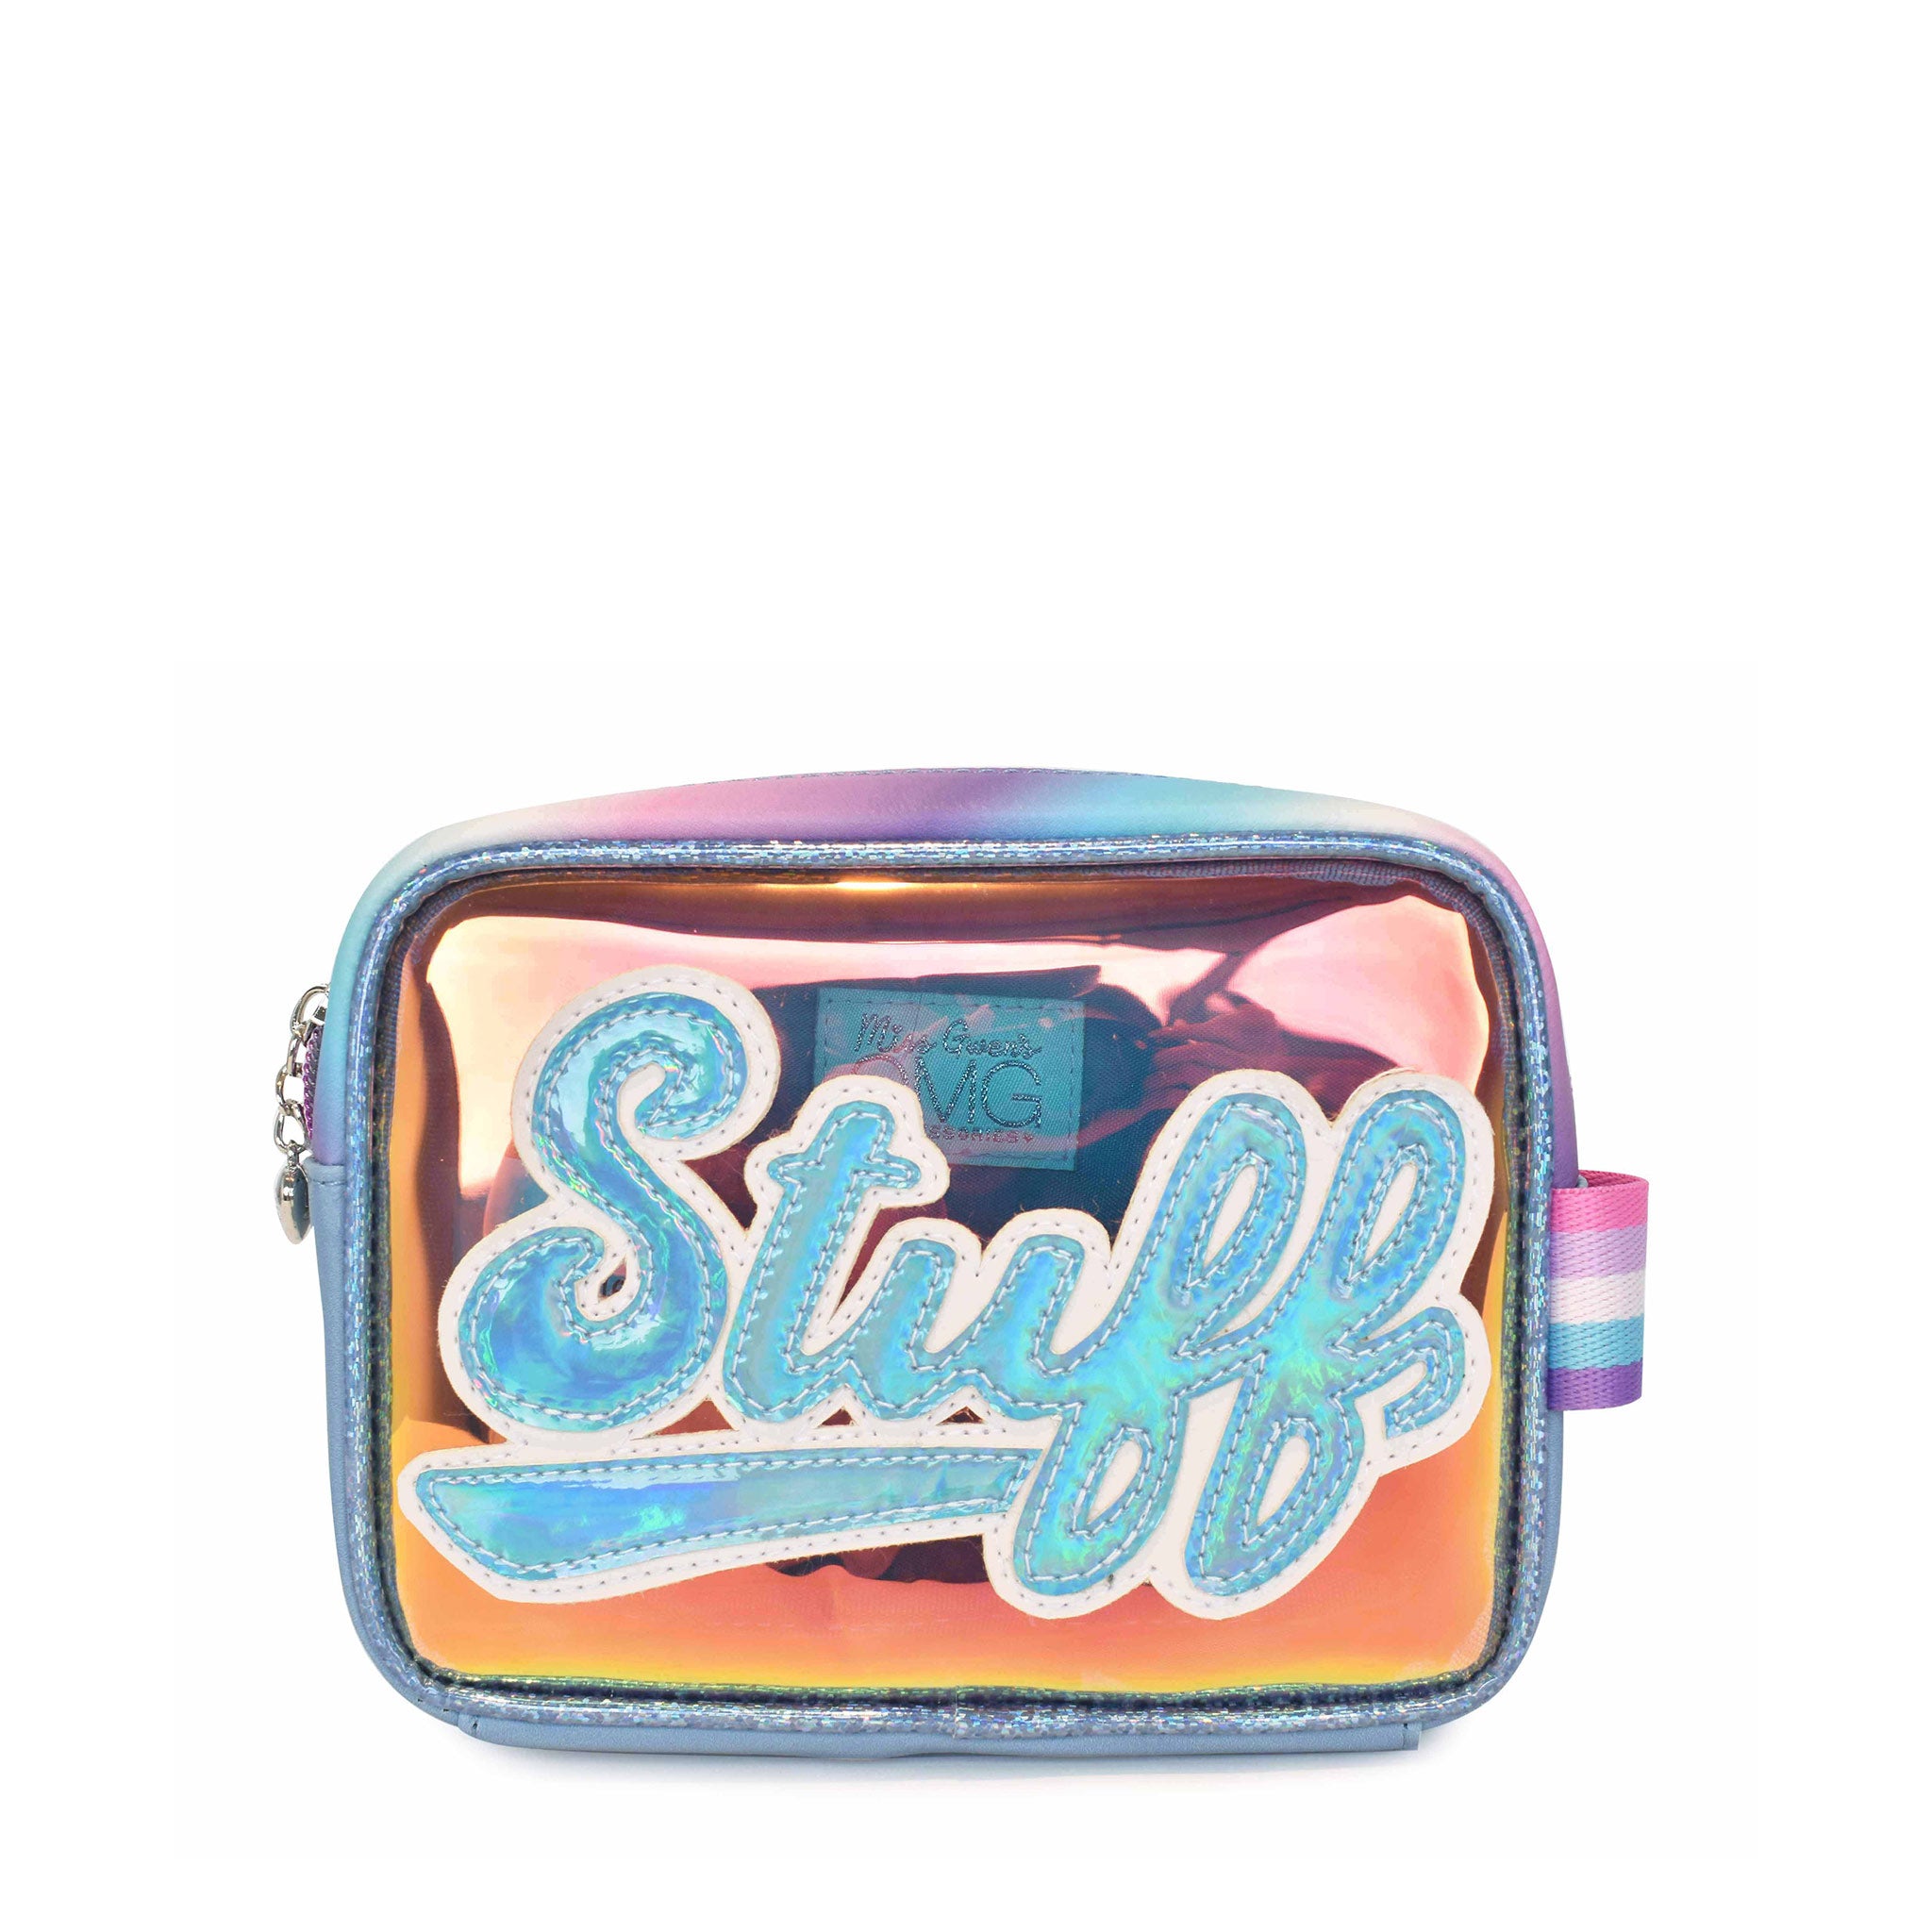 Front view of a blue clear front pencil case with metallic script lettering 'STUFF'